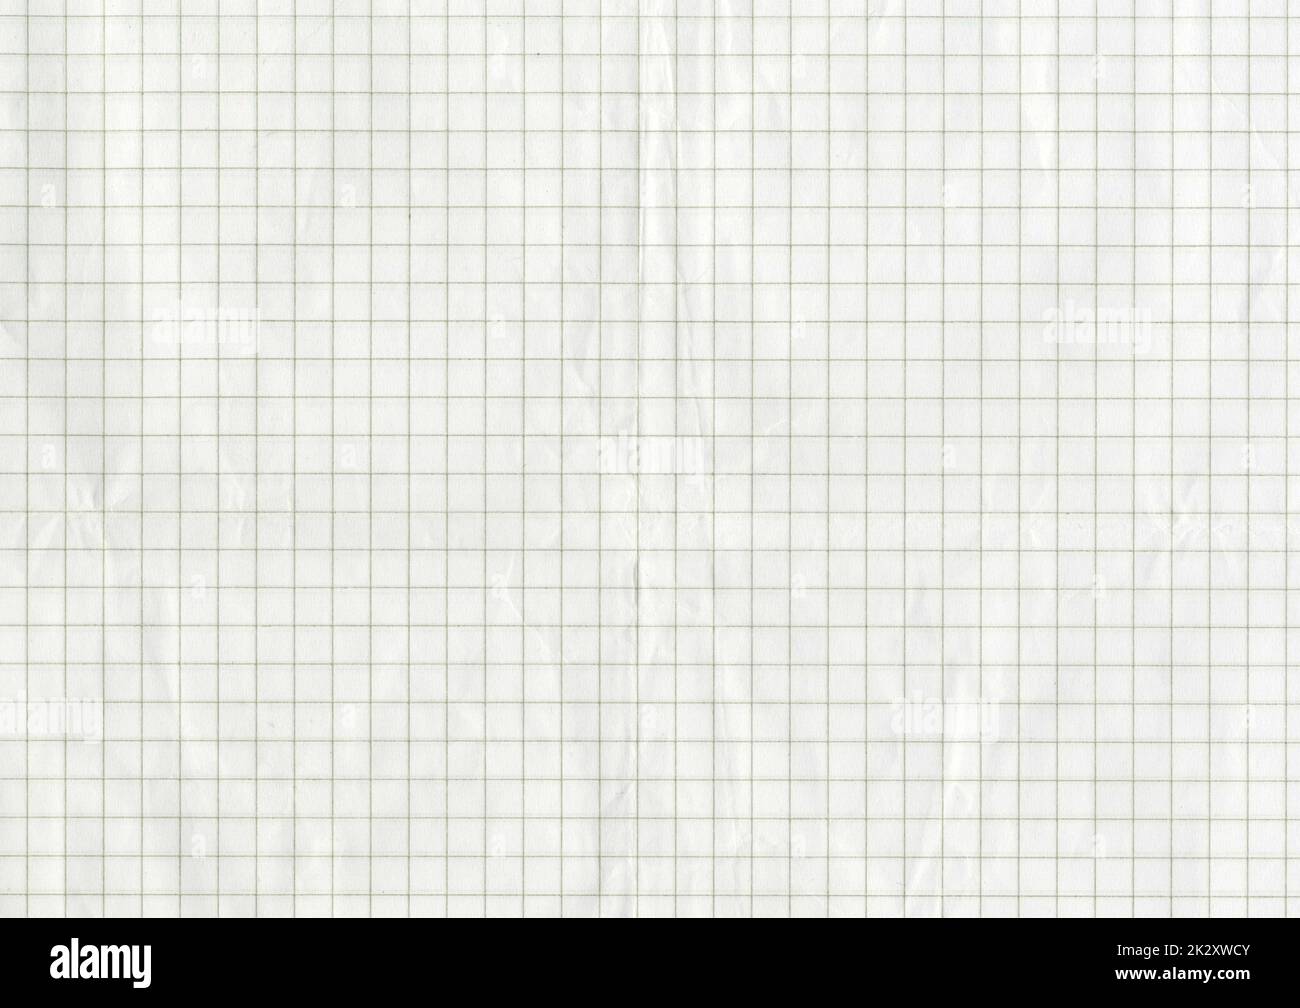 High resolution large image of a white uncoated checkered graph paper scan wrinkled weathered old thin textbook paper with gray checkers copy space for text for presentation high quality wallpaper Stock Photo